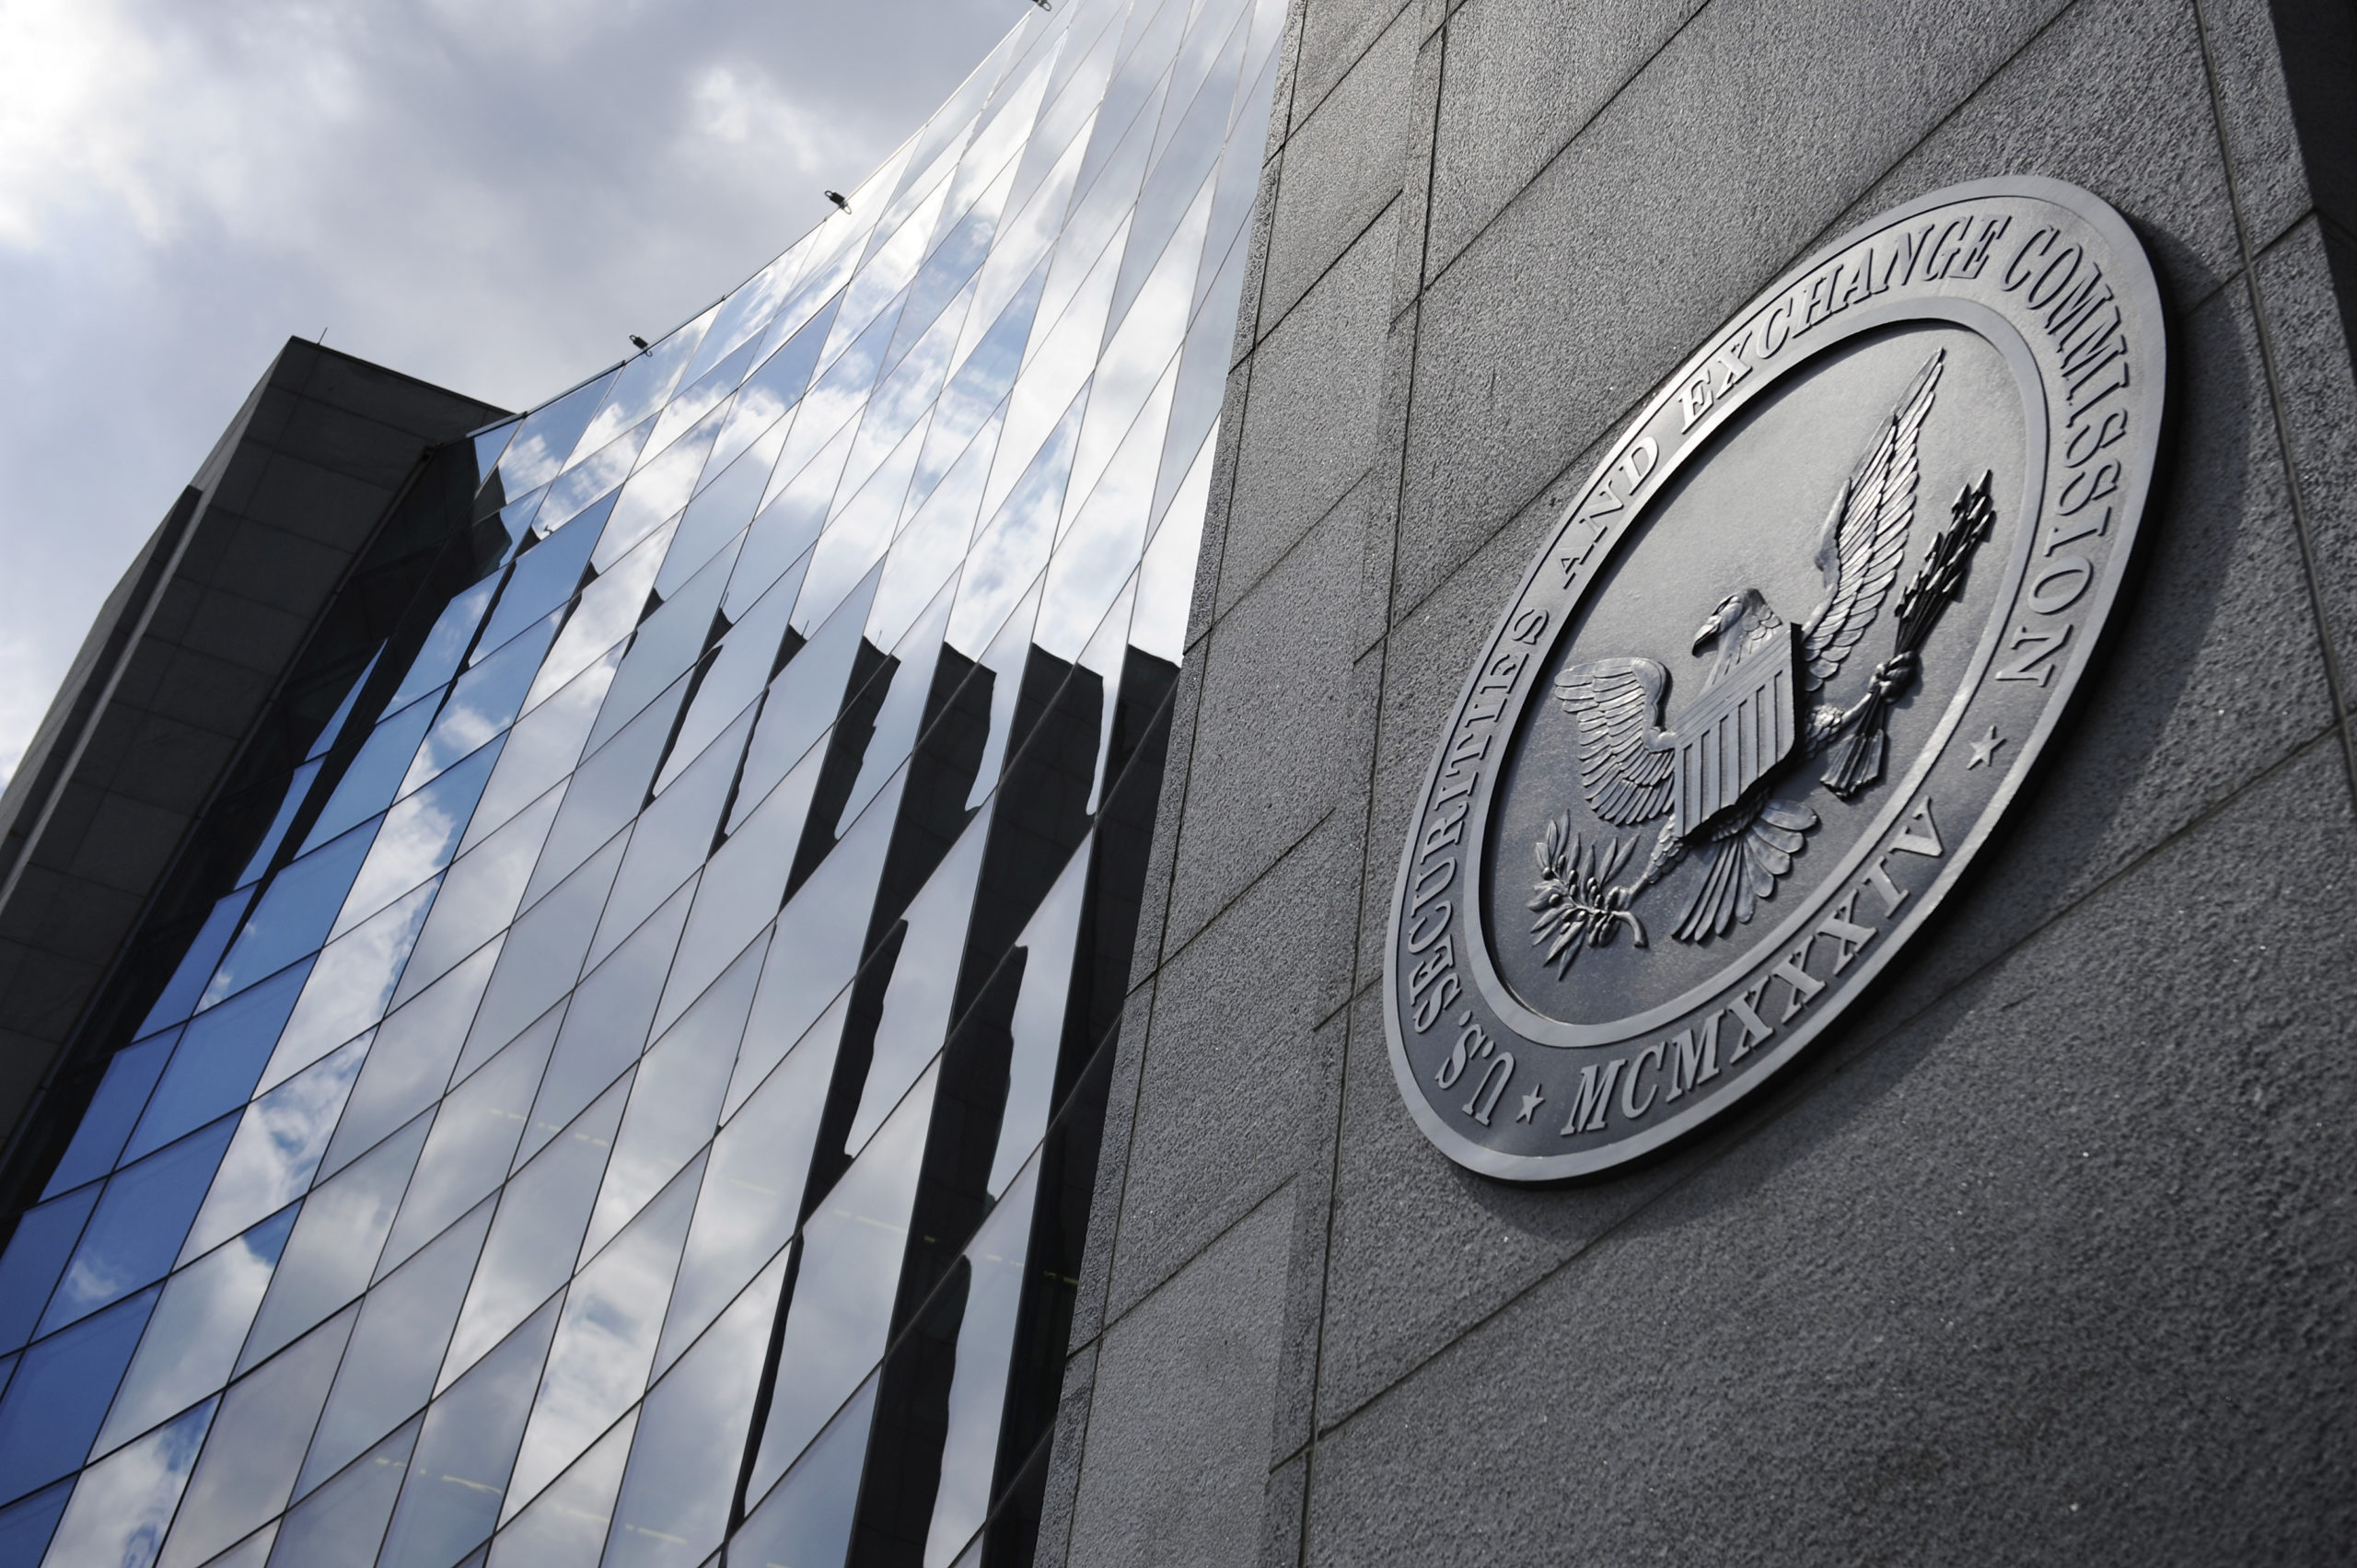 SEC Releases Framework for “Investment Contract” Analysis of Digital Assets